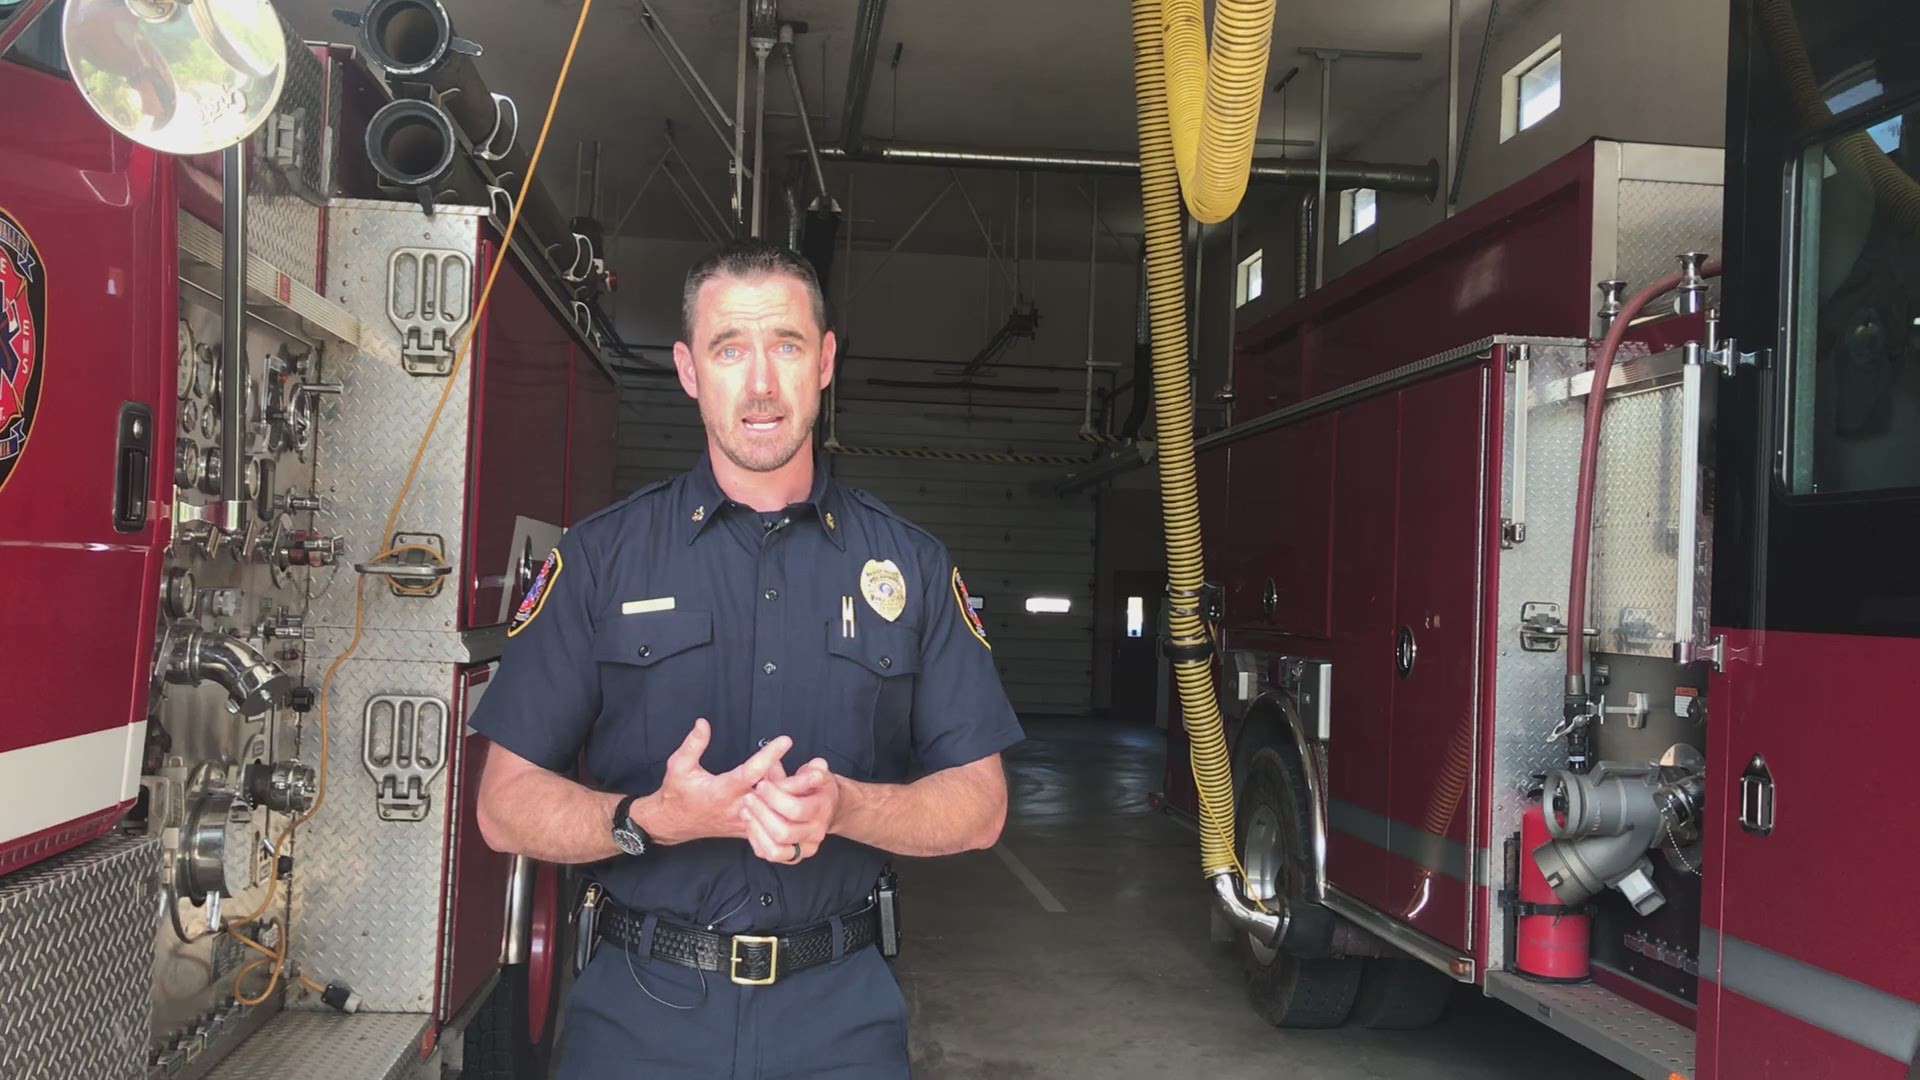 Garden Valley Fire Chief Clive Savacool discusses department cutbacks days after two firefighters were injured battling a fire.